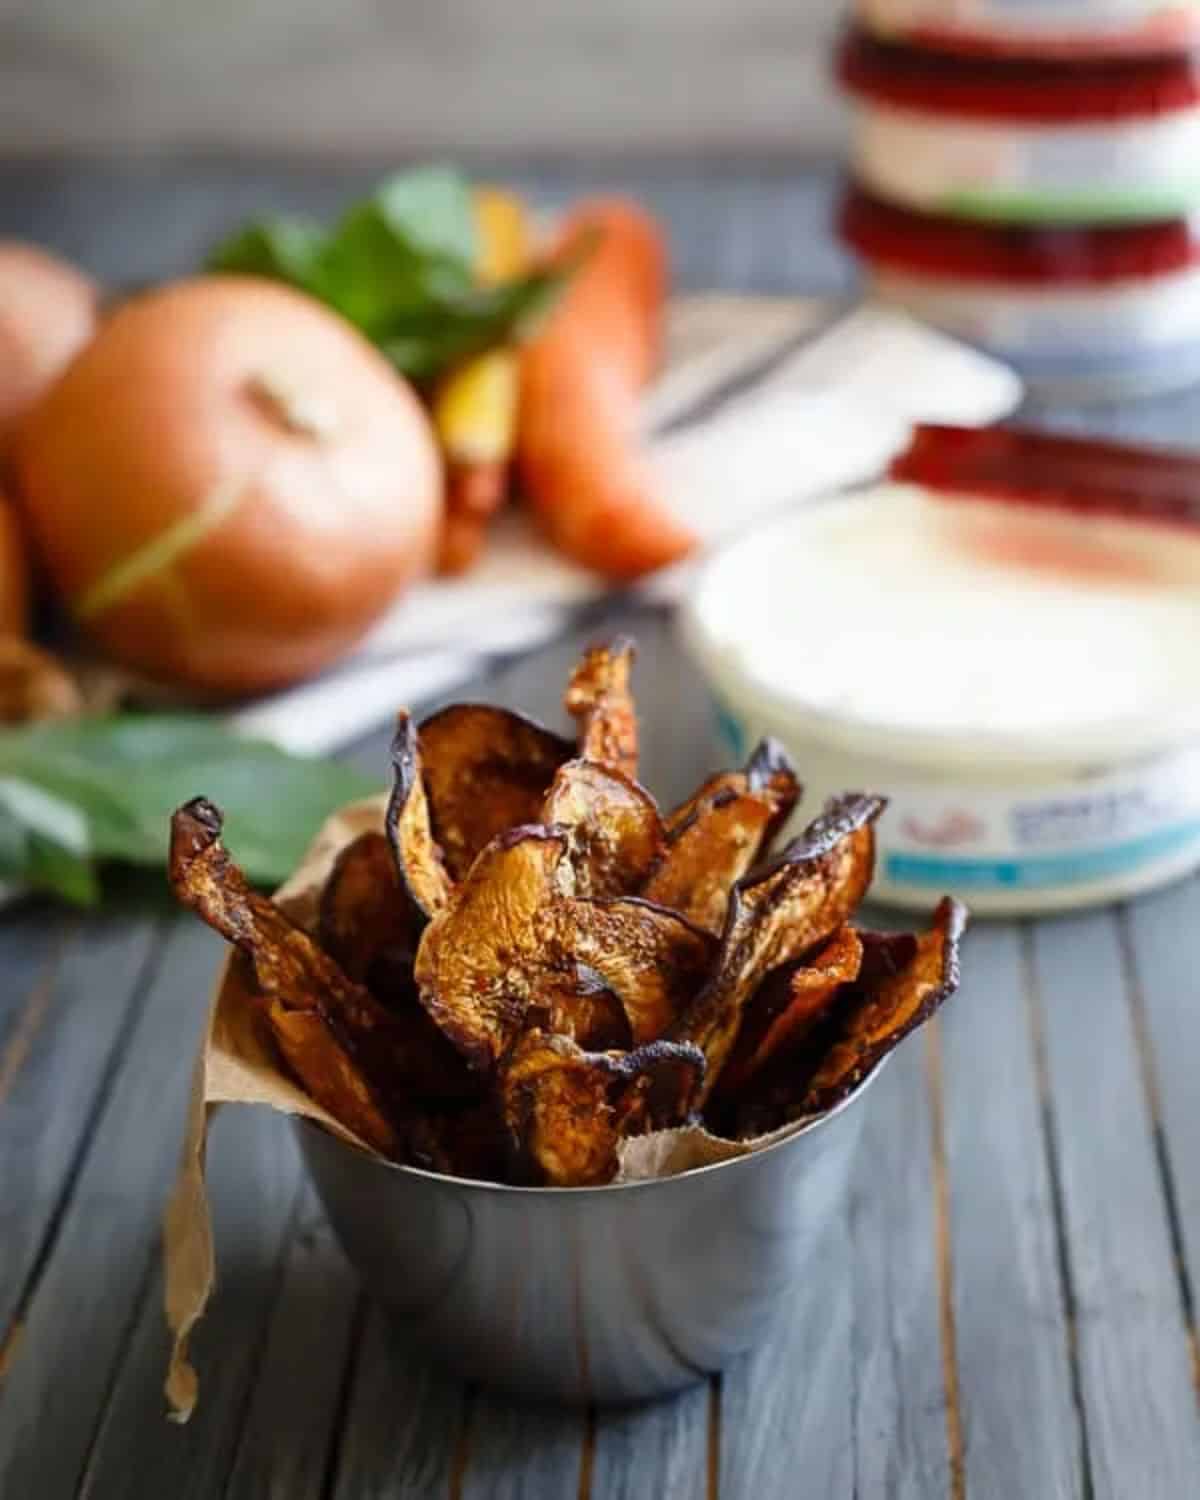 Mediterranean eggplant chips in a small metal bowl.